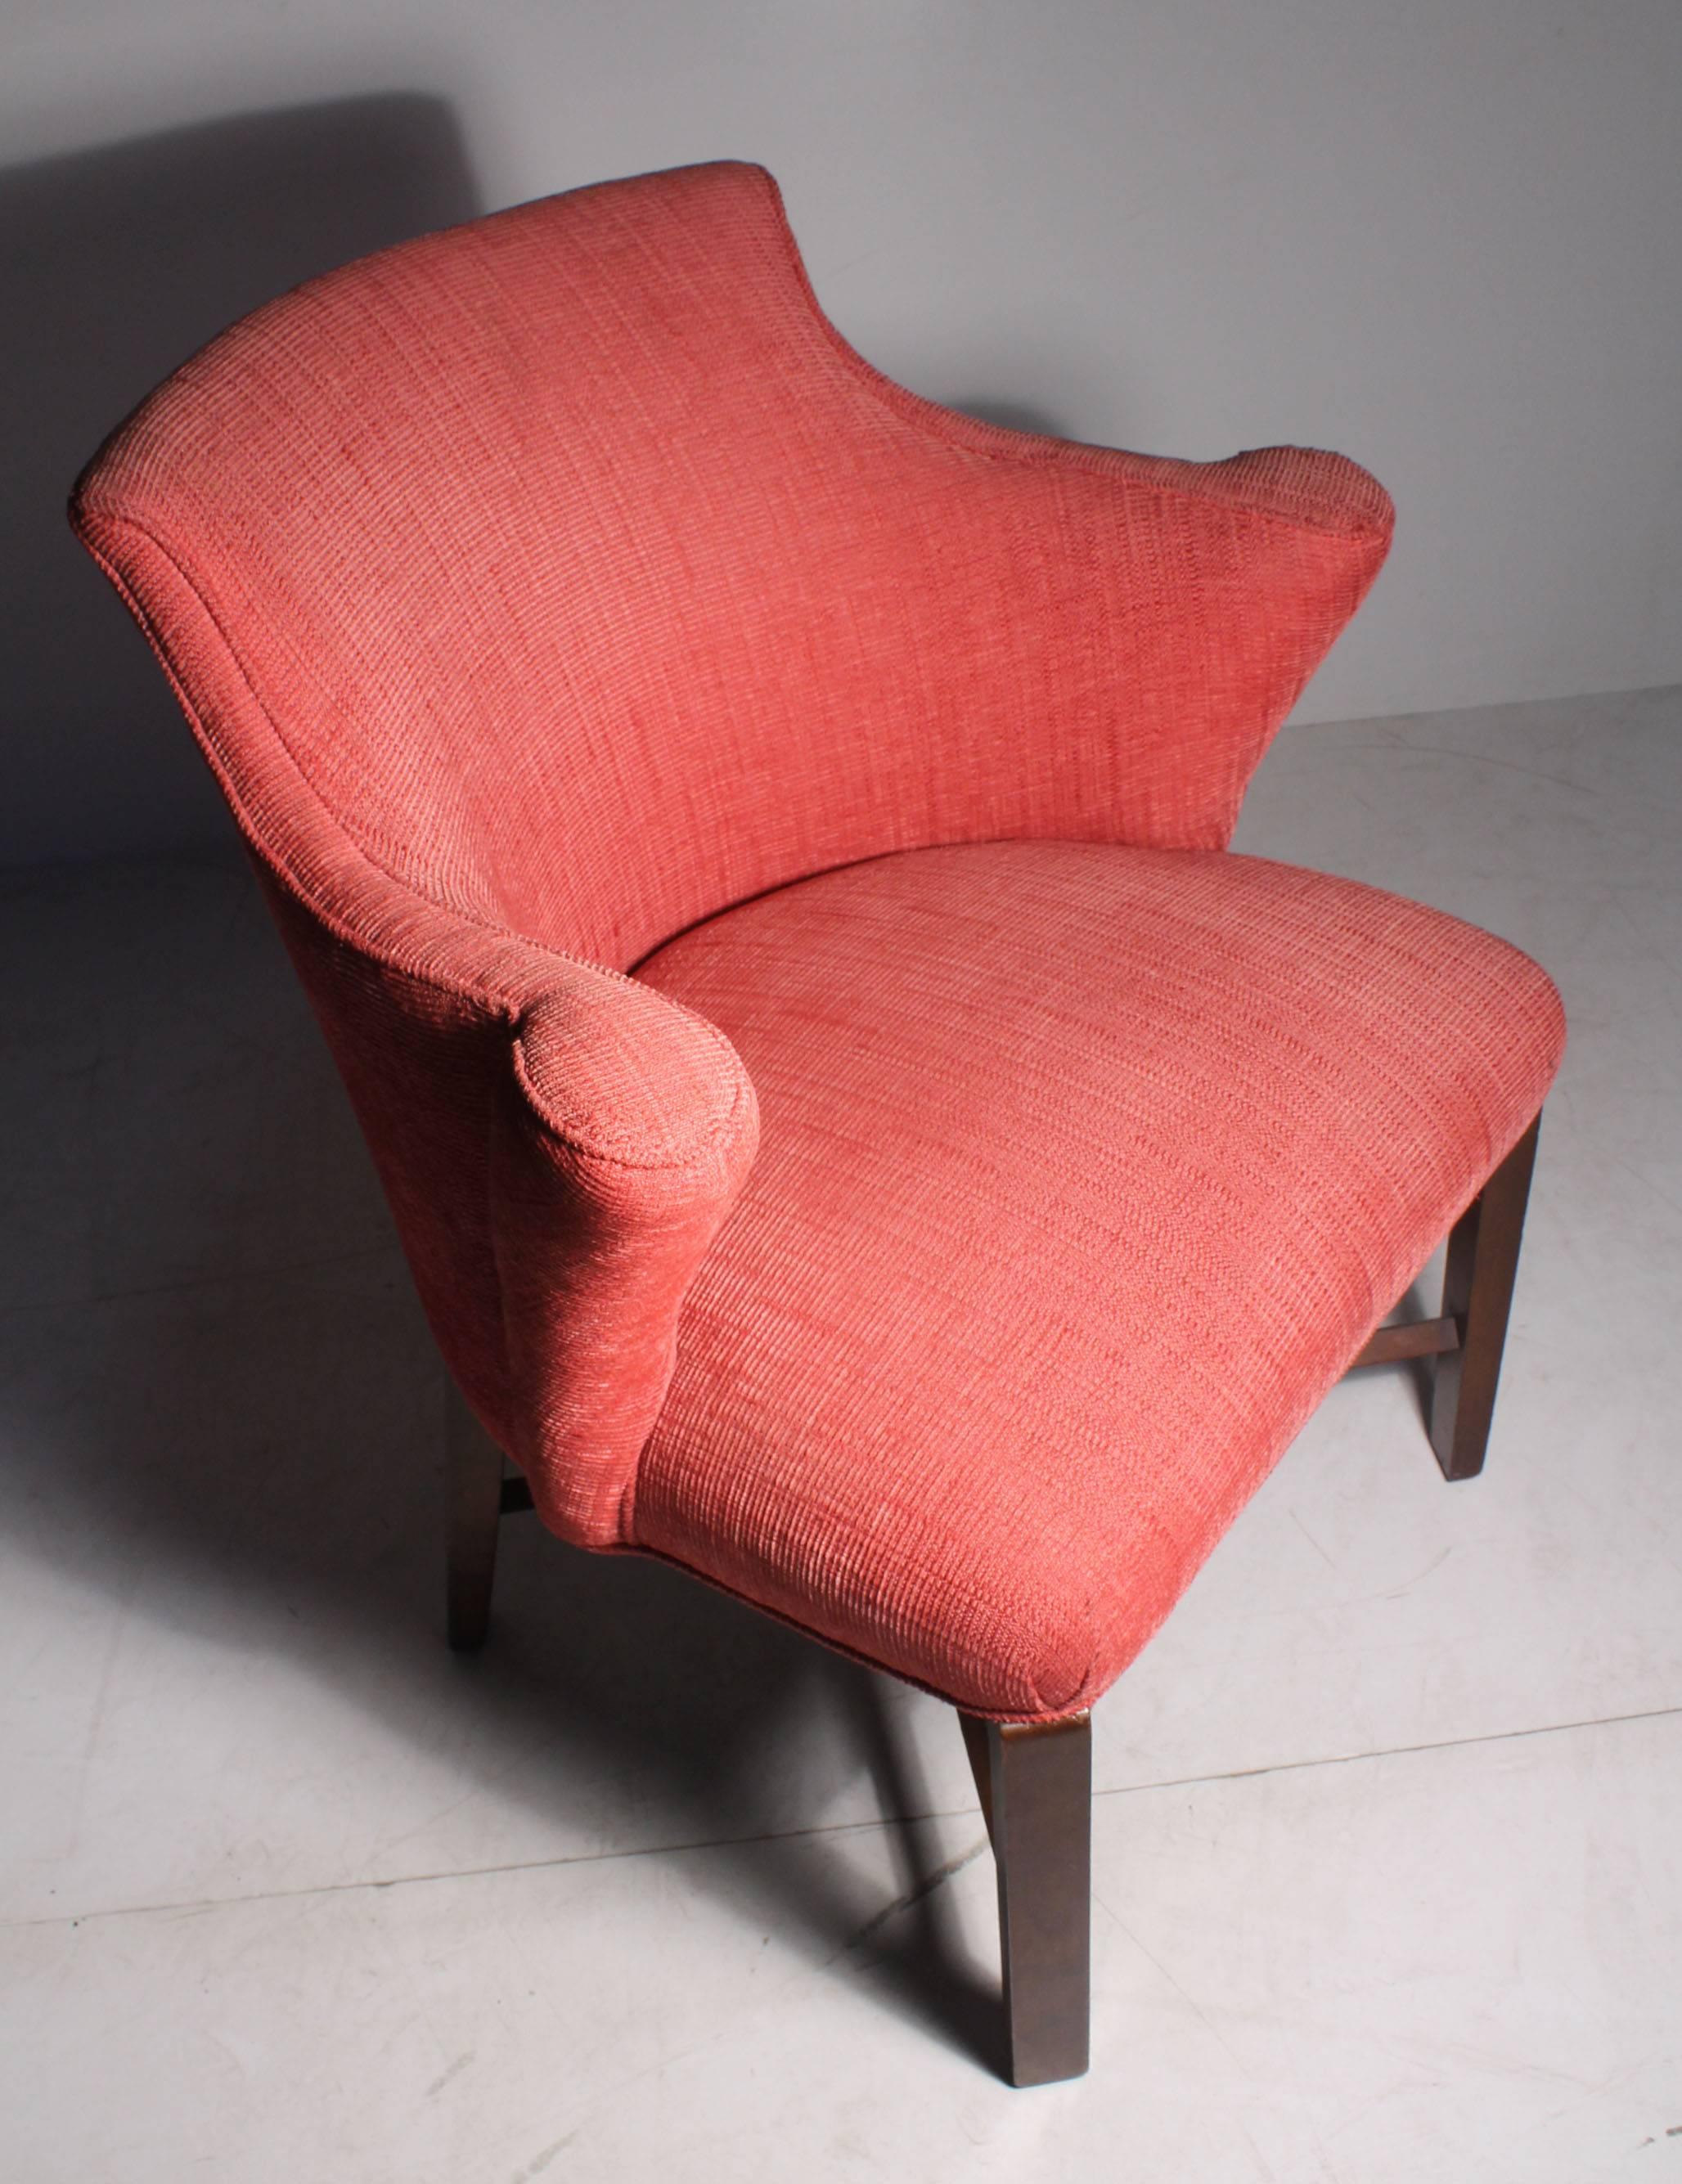 Upholstery Syrie Maugham Armchairs - 4 Chairs available - Hollywood Regency